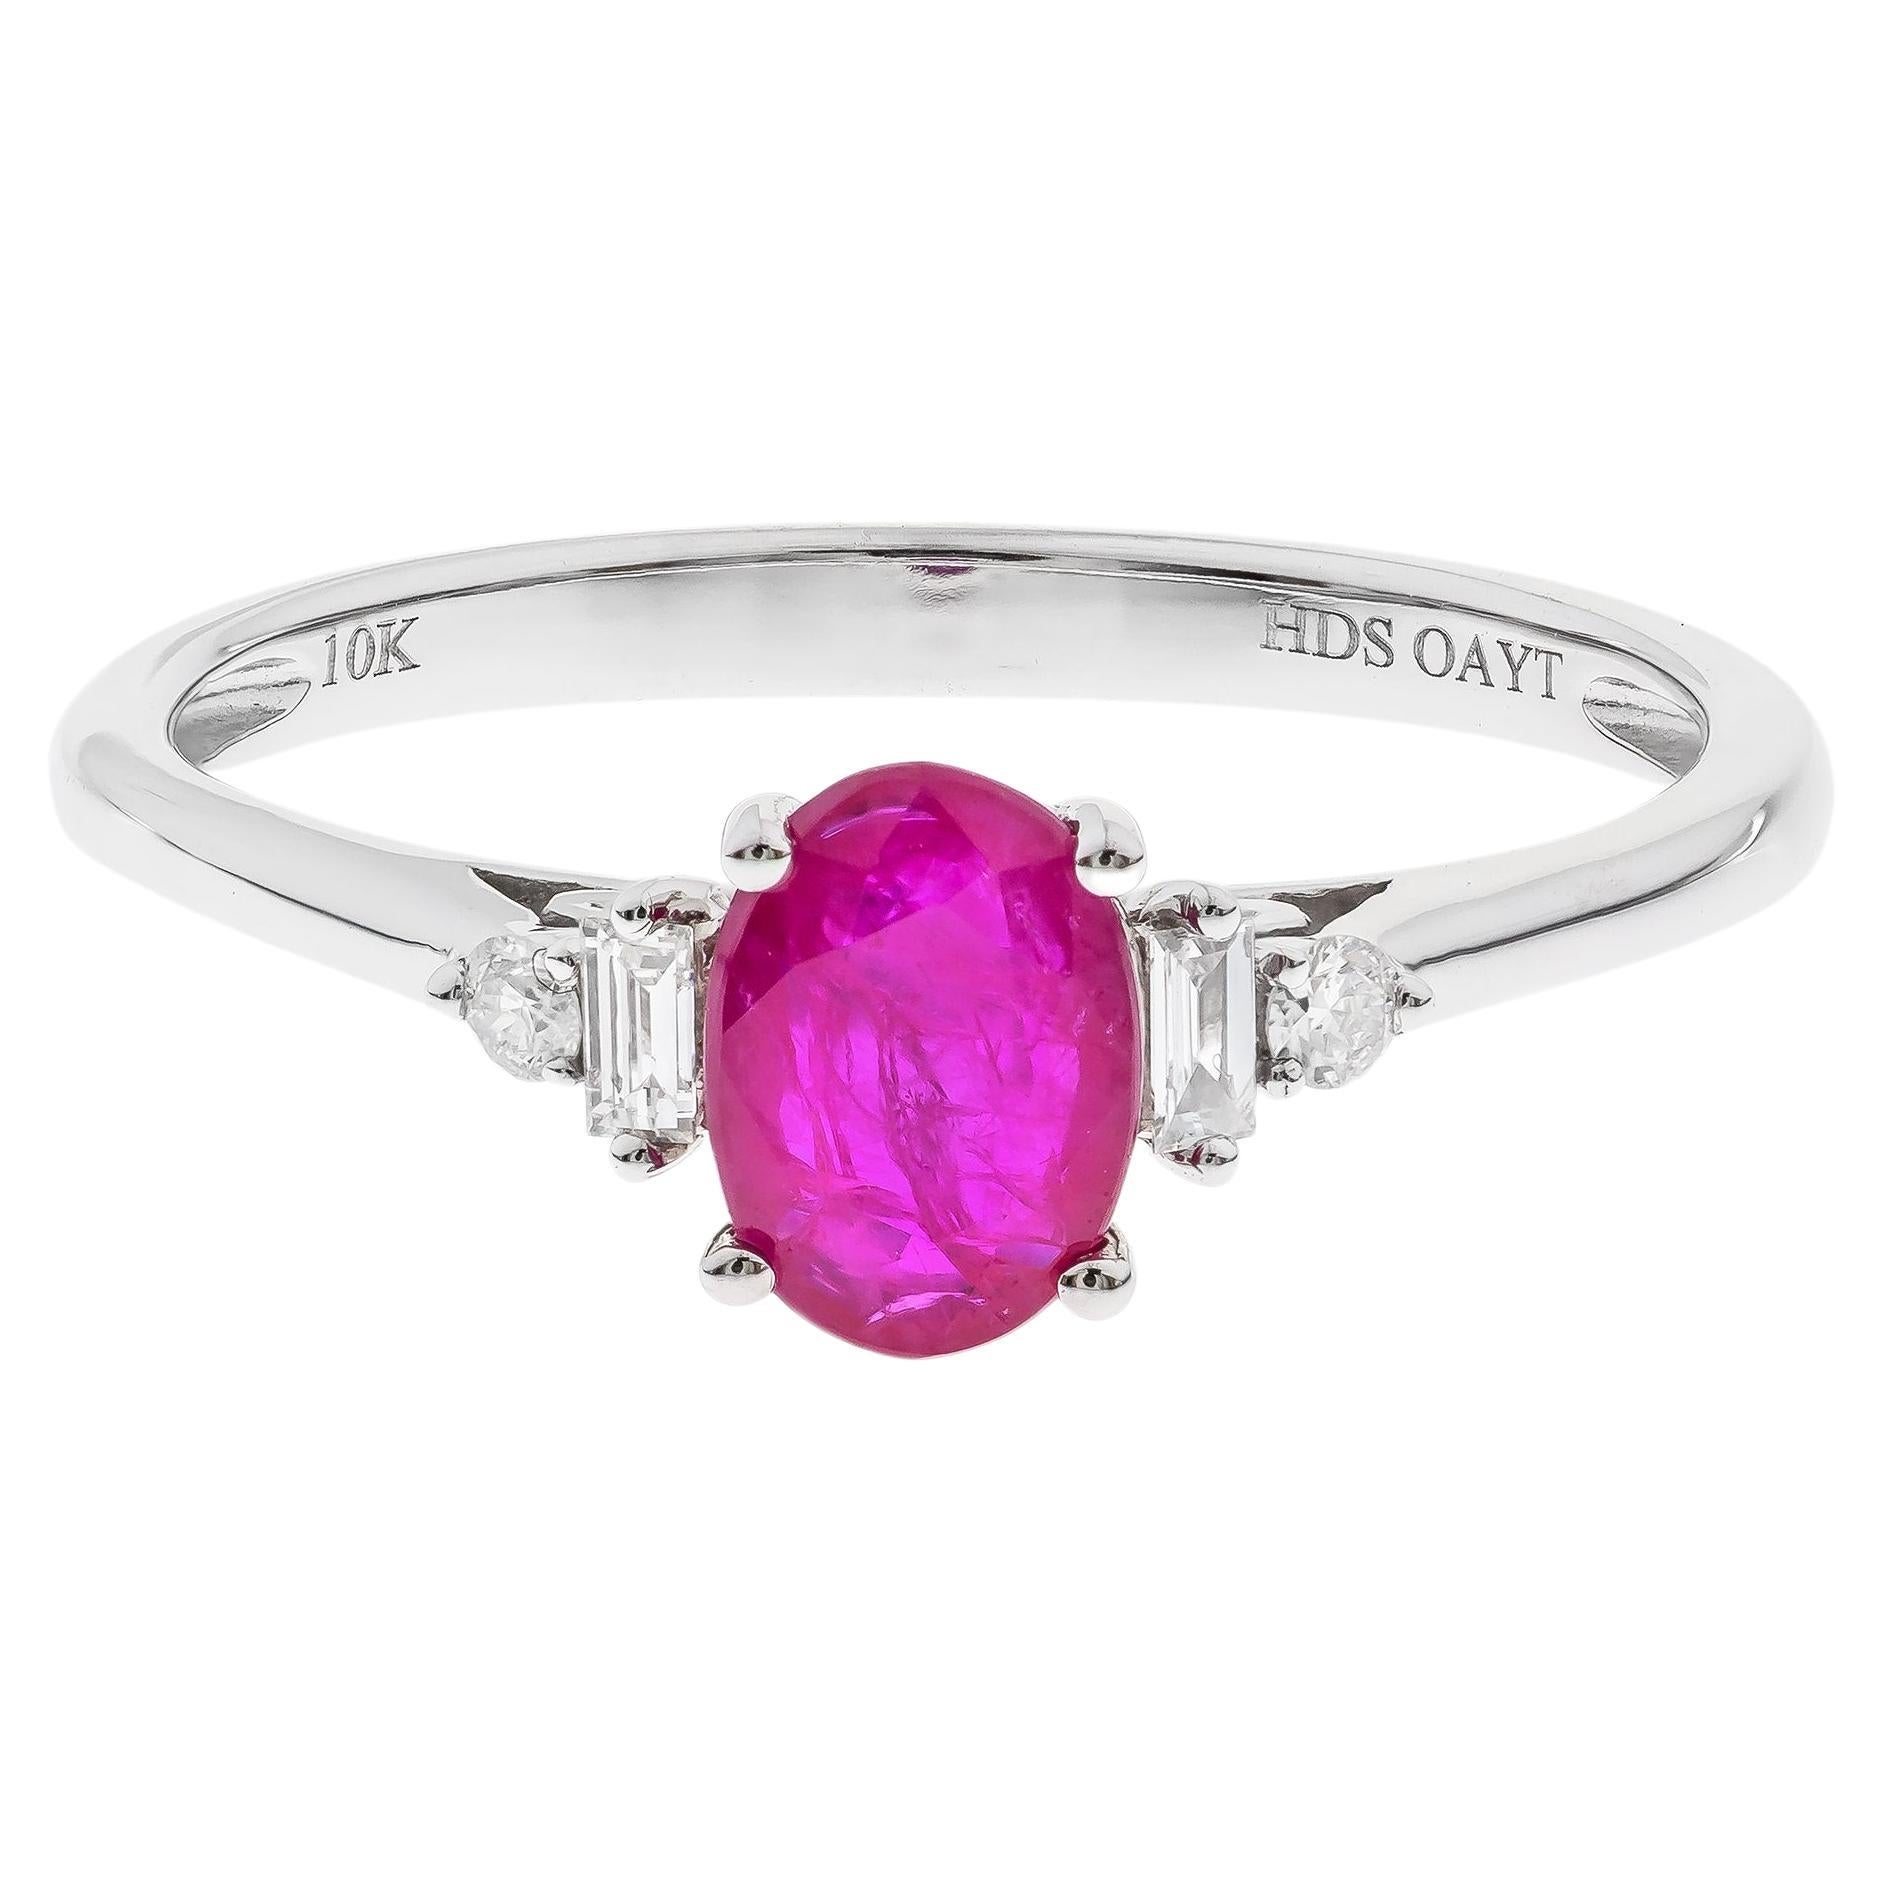 0.86 Carat oval-Cut Ruby Diamond Accents 10K White Gold Ring